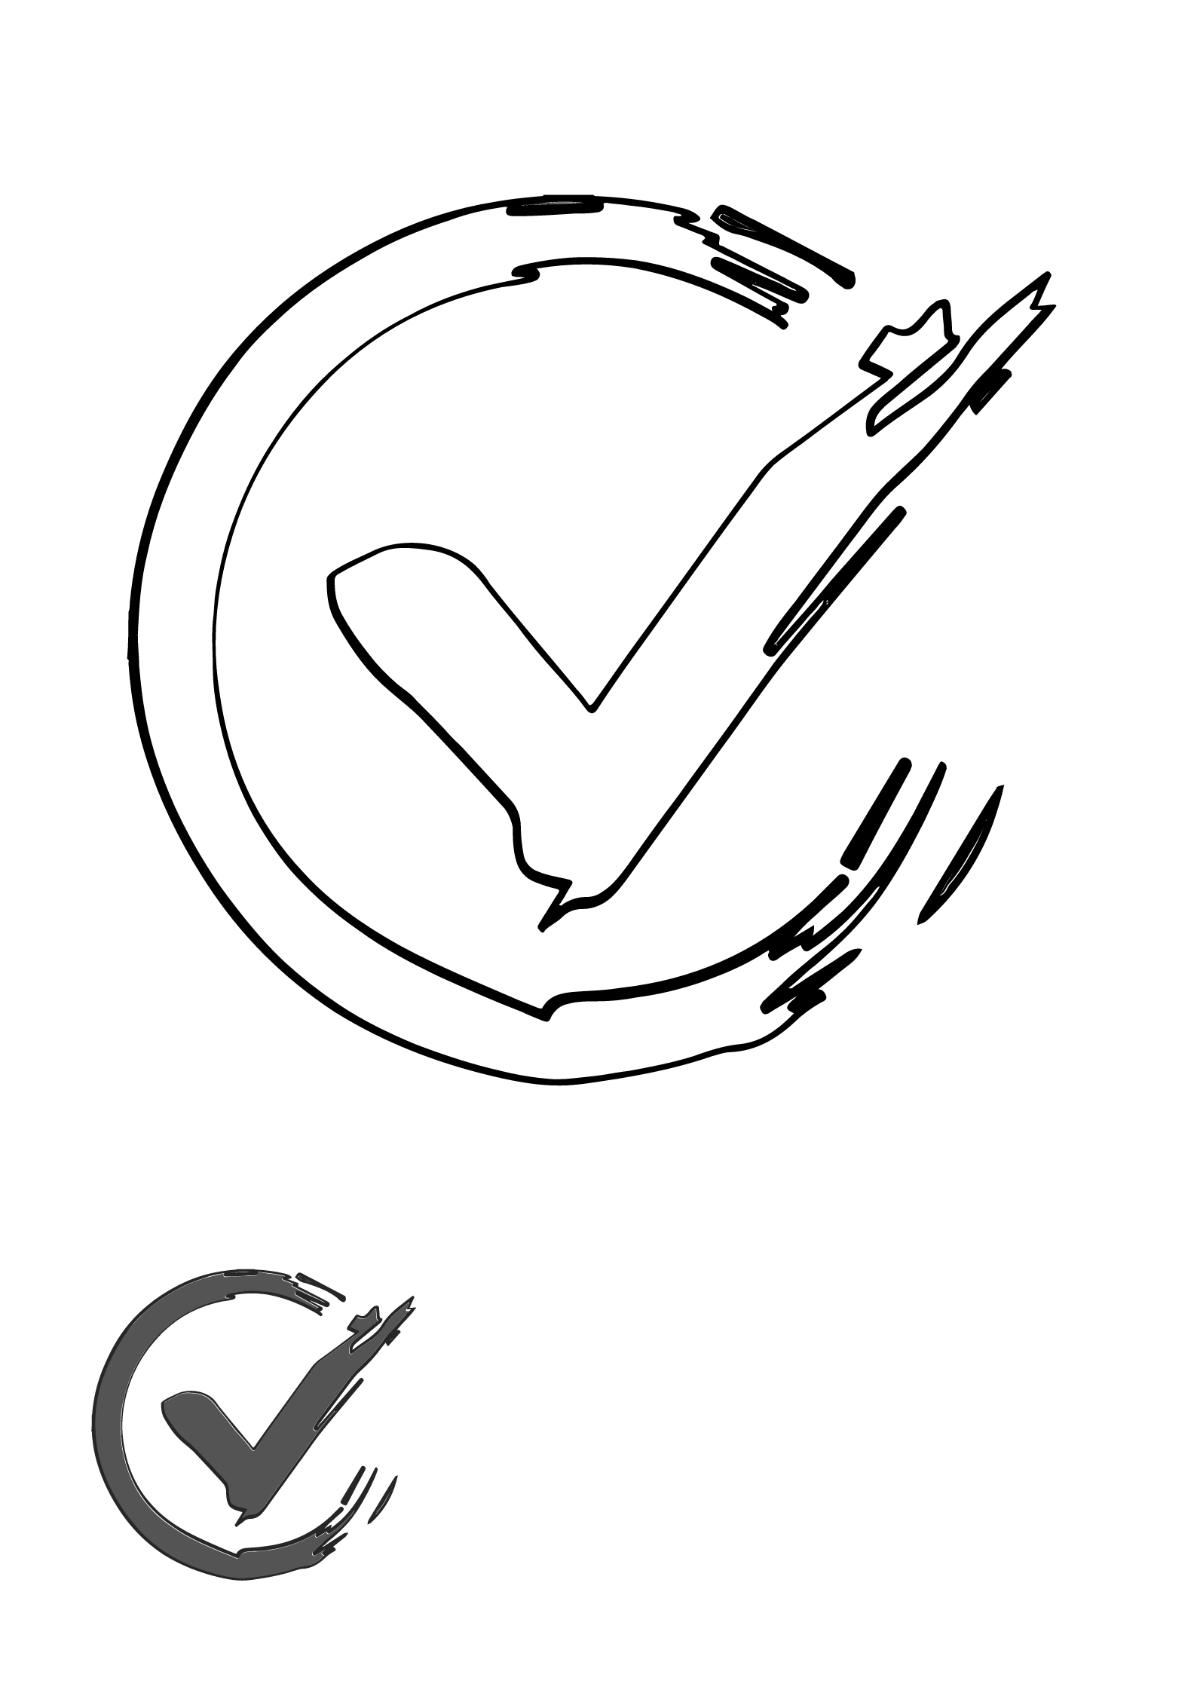 Free Grunge Check Mark Coloring Page Template